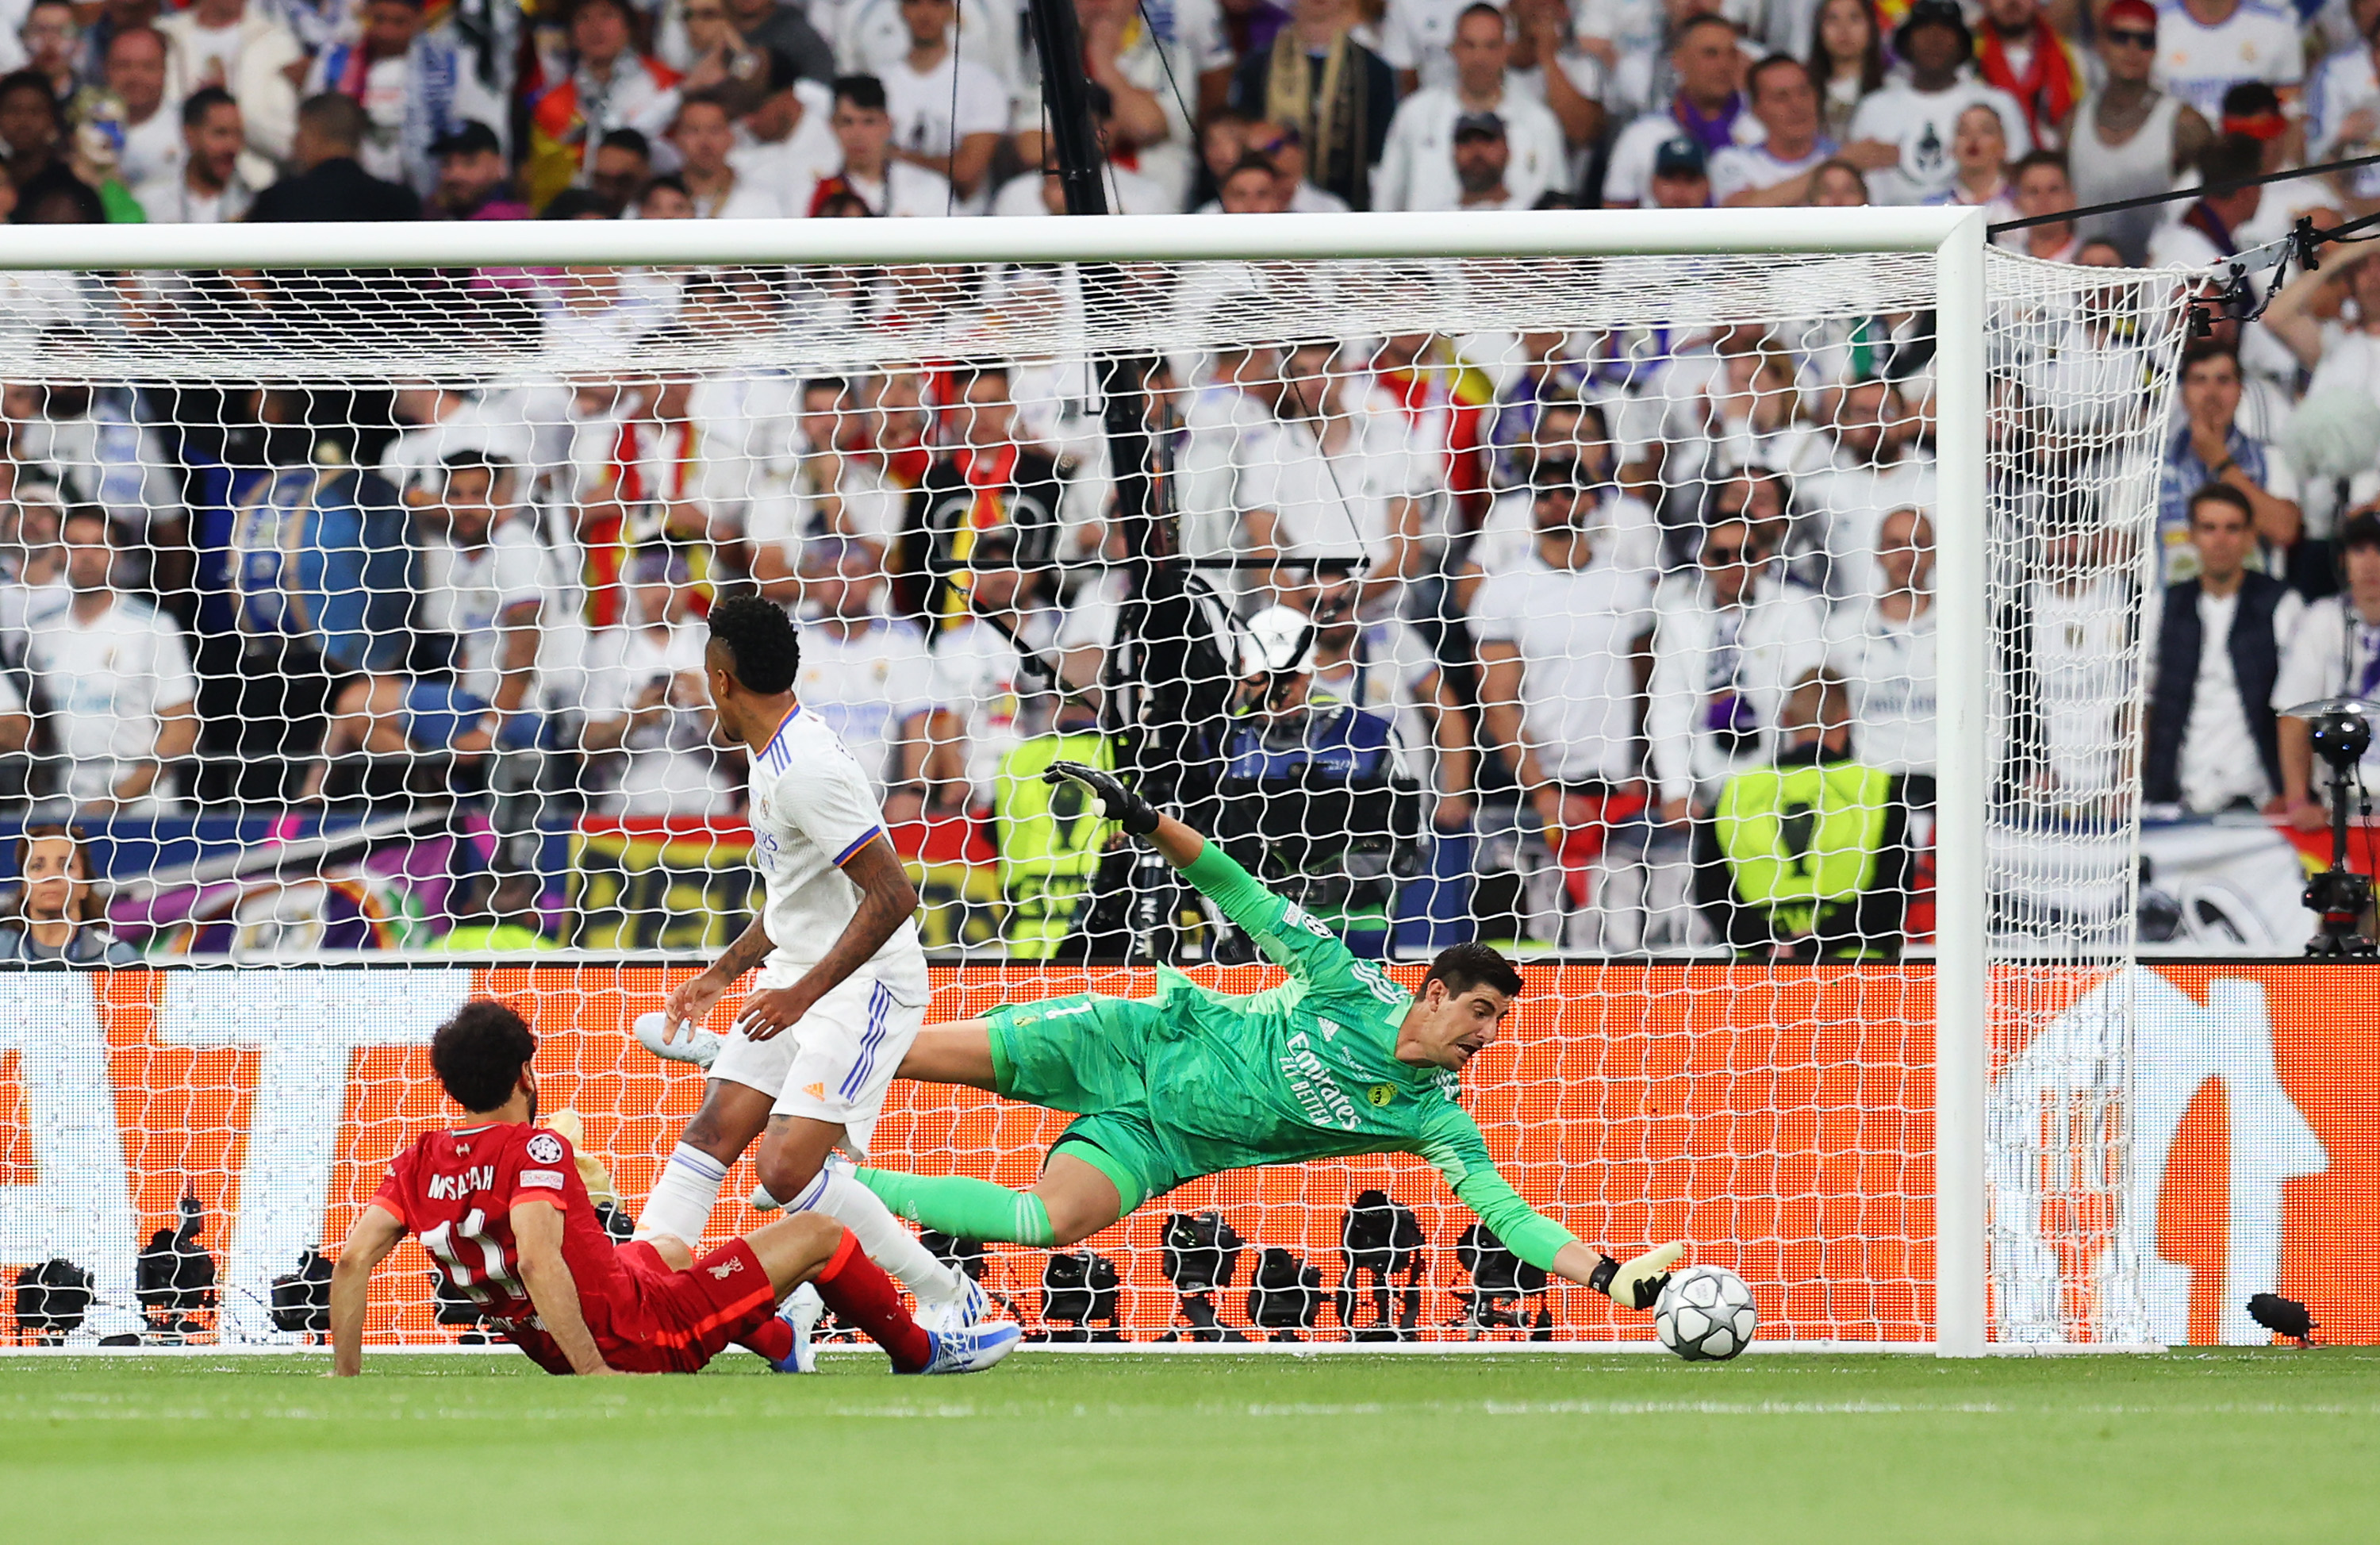 UEFA Champions League Final: Real Madrid beat Liverpool 1-0 to win 14th CHAMPIONS LEAGUE title, Vinicius Junior scores the winner, Watch HIGHLIGHTS